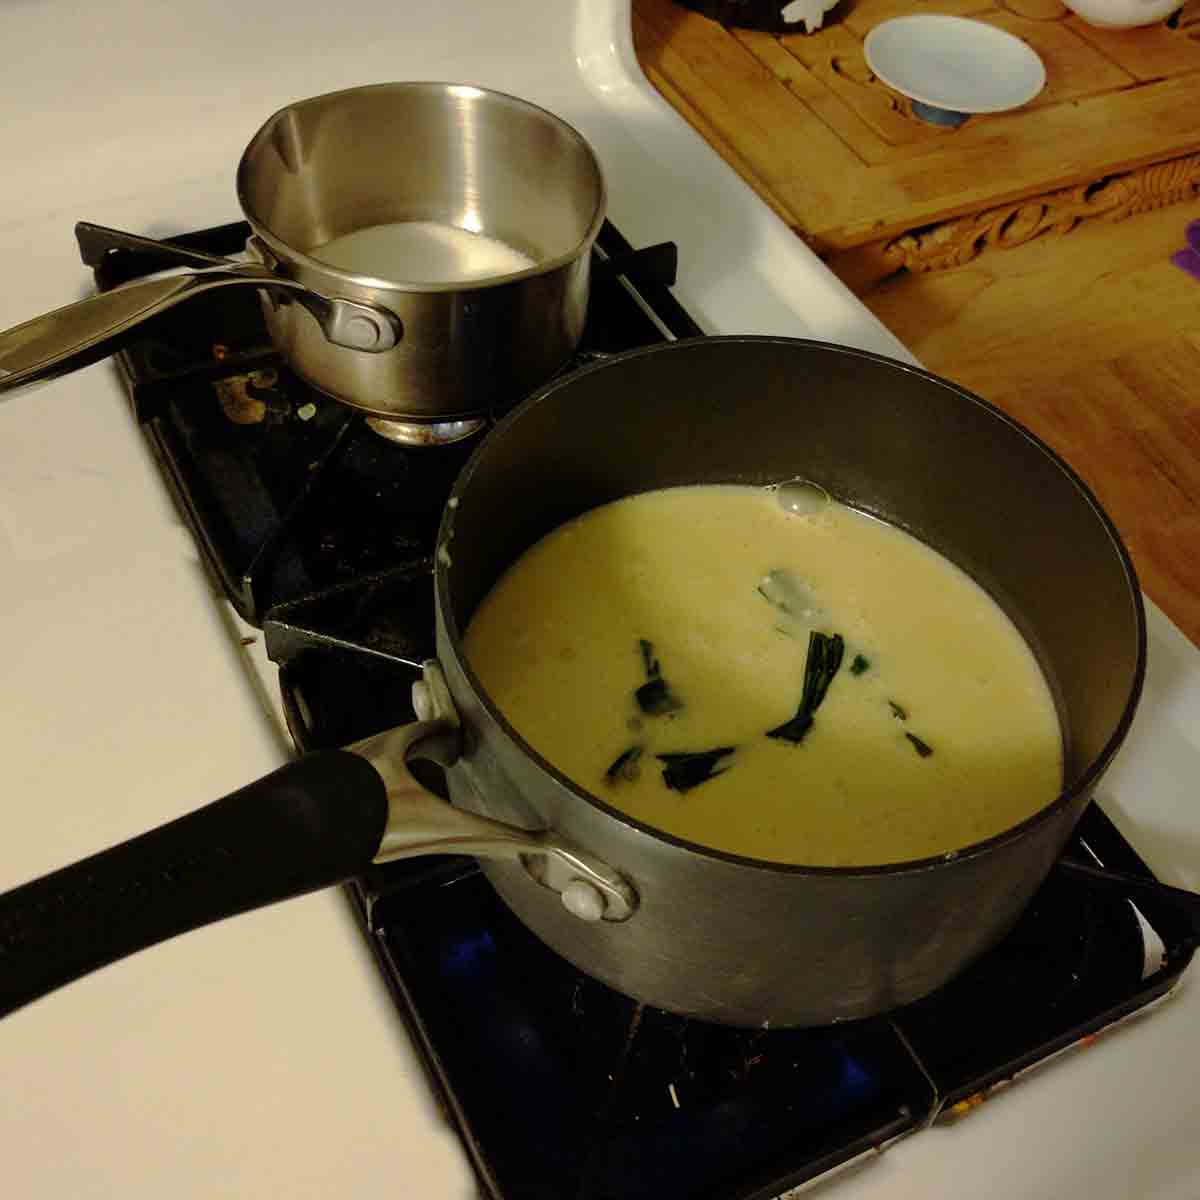 Kaya recipe, showing the egg mixture and pandan leaf knots in one saucepan, sugar in another saucepan.